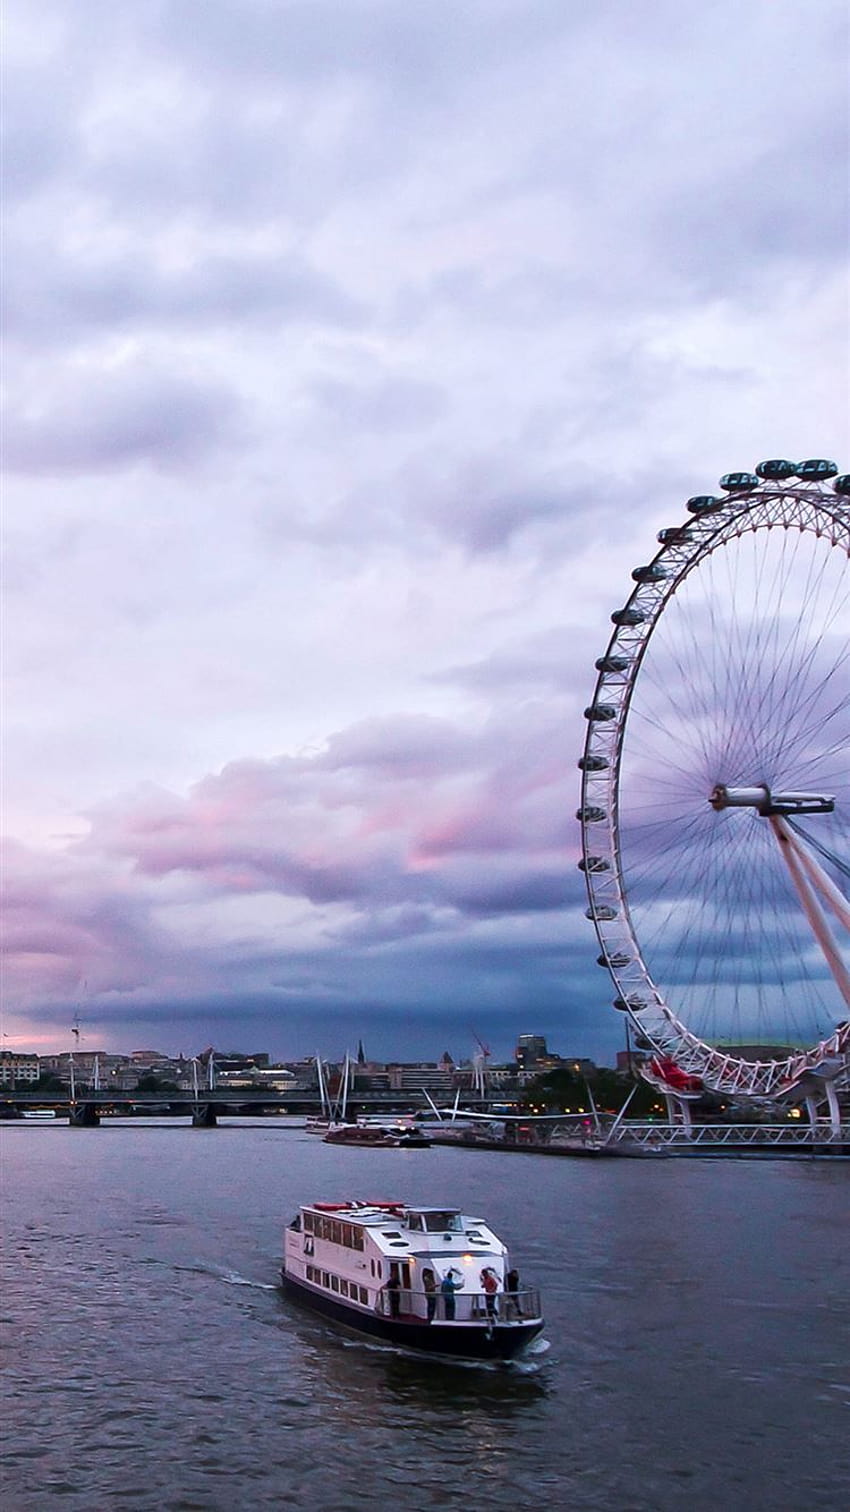 A boat passing by the London Eye in the evening - London